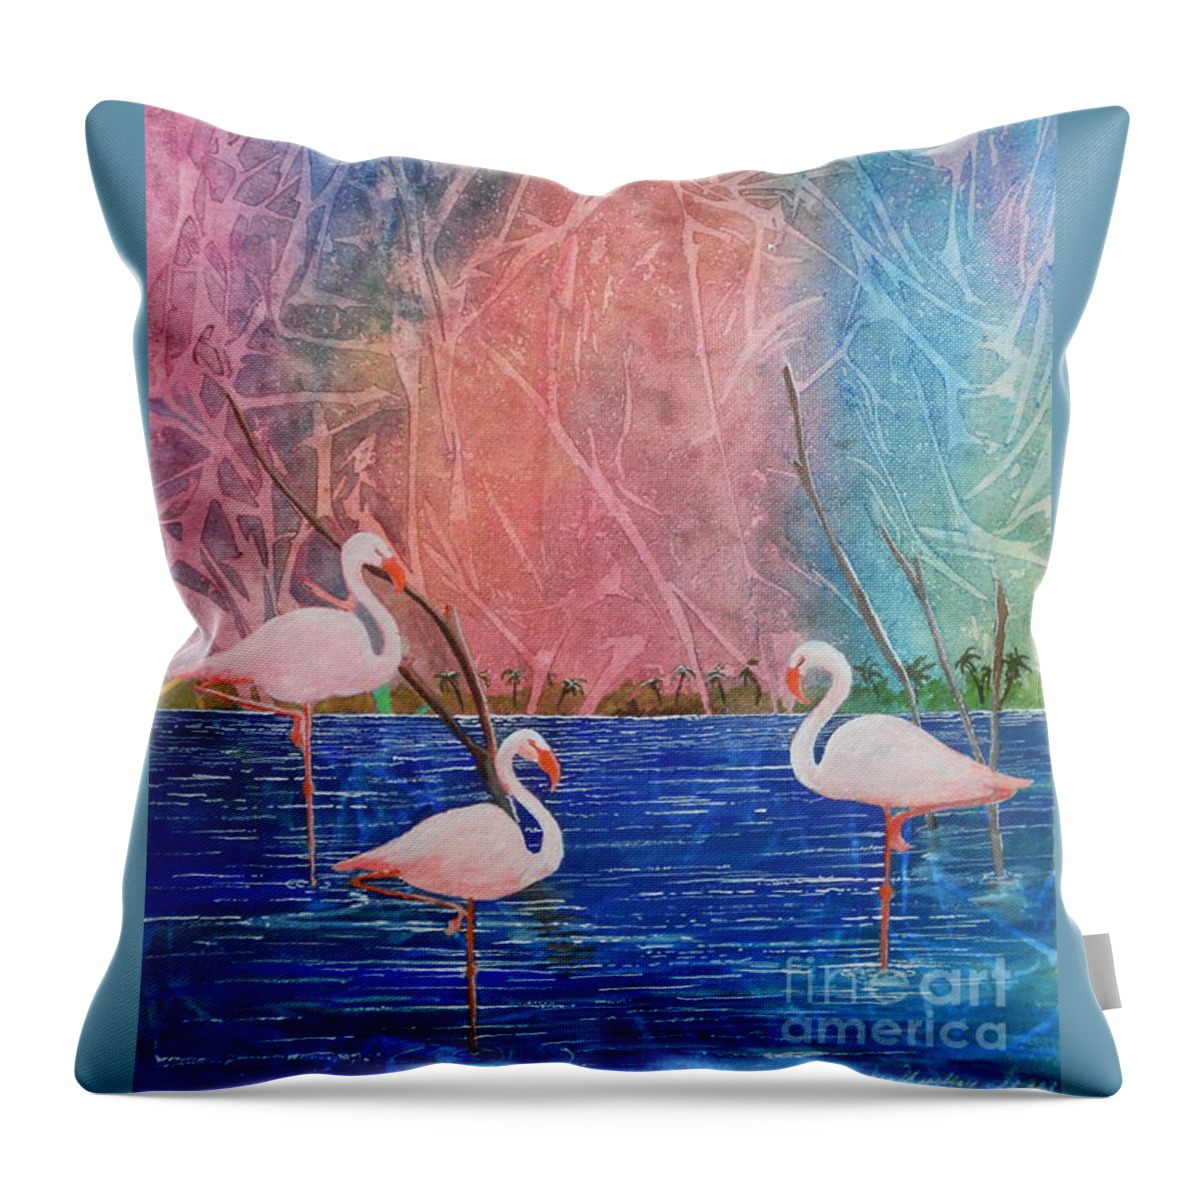 Flamingos Throw Pillow featuring the painting Three Pink Flamingos by Jackie Mueller-Jones